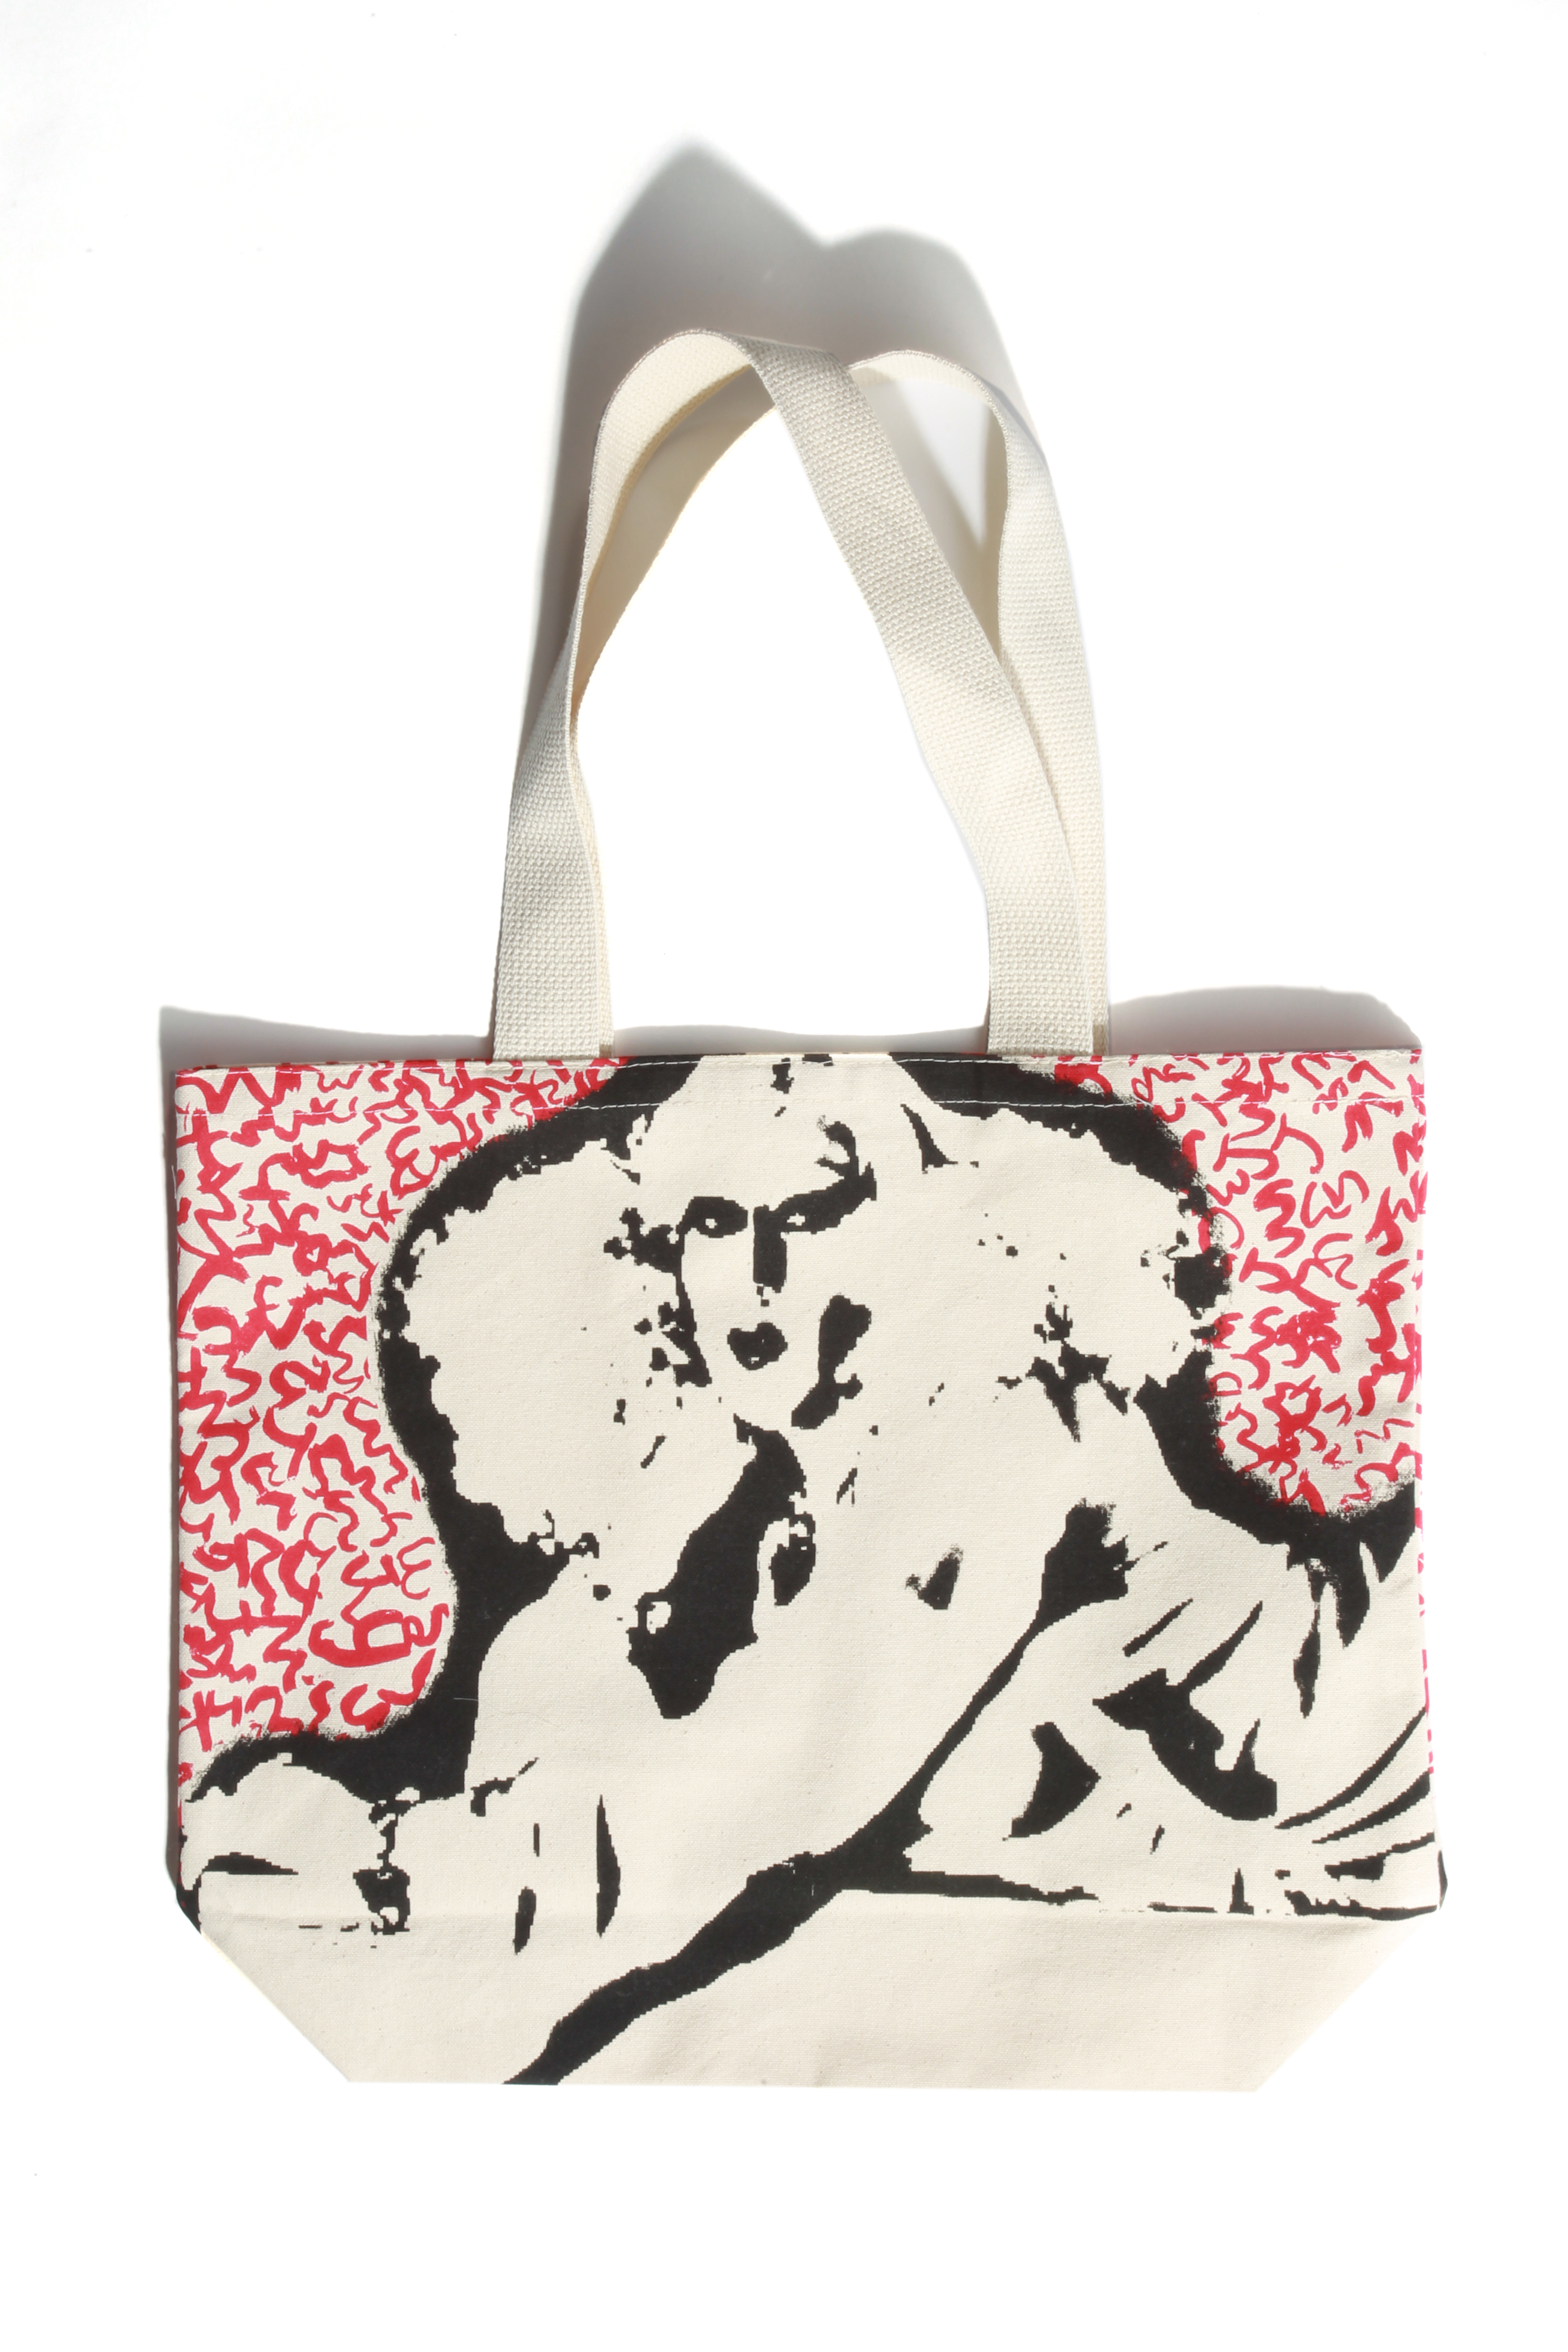 A tote designed by Yun Ling Tham.